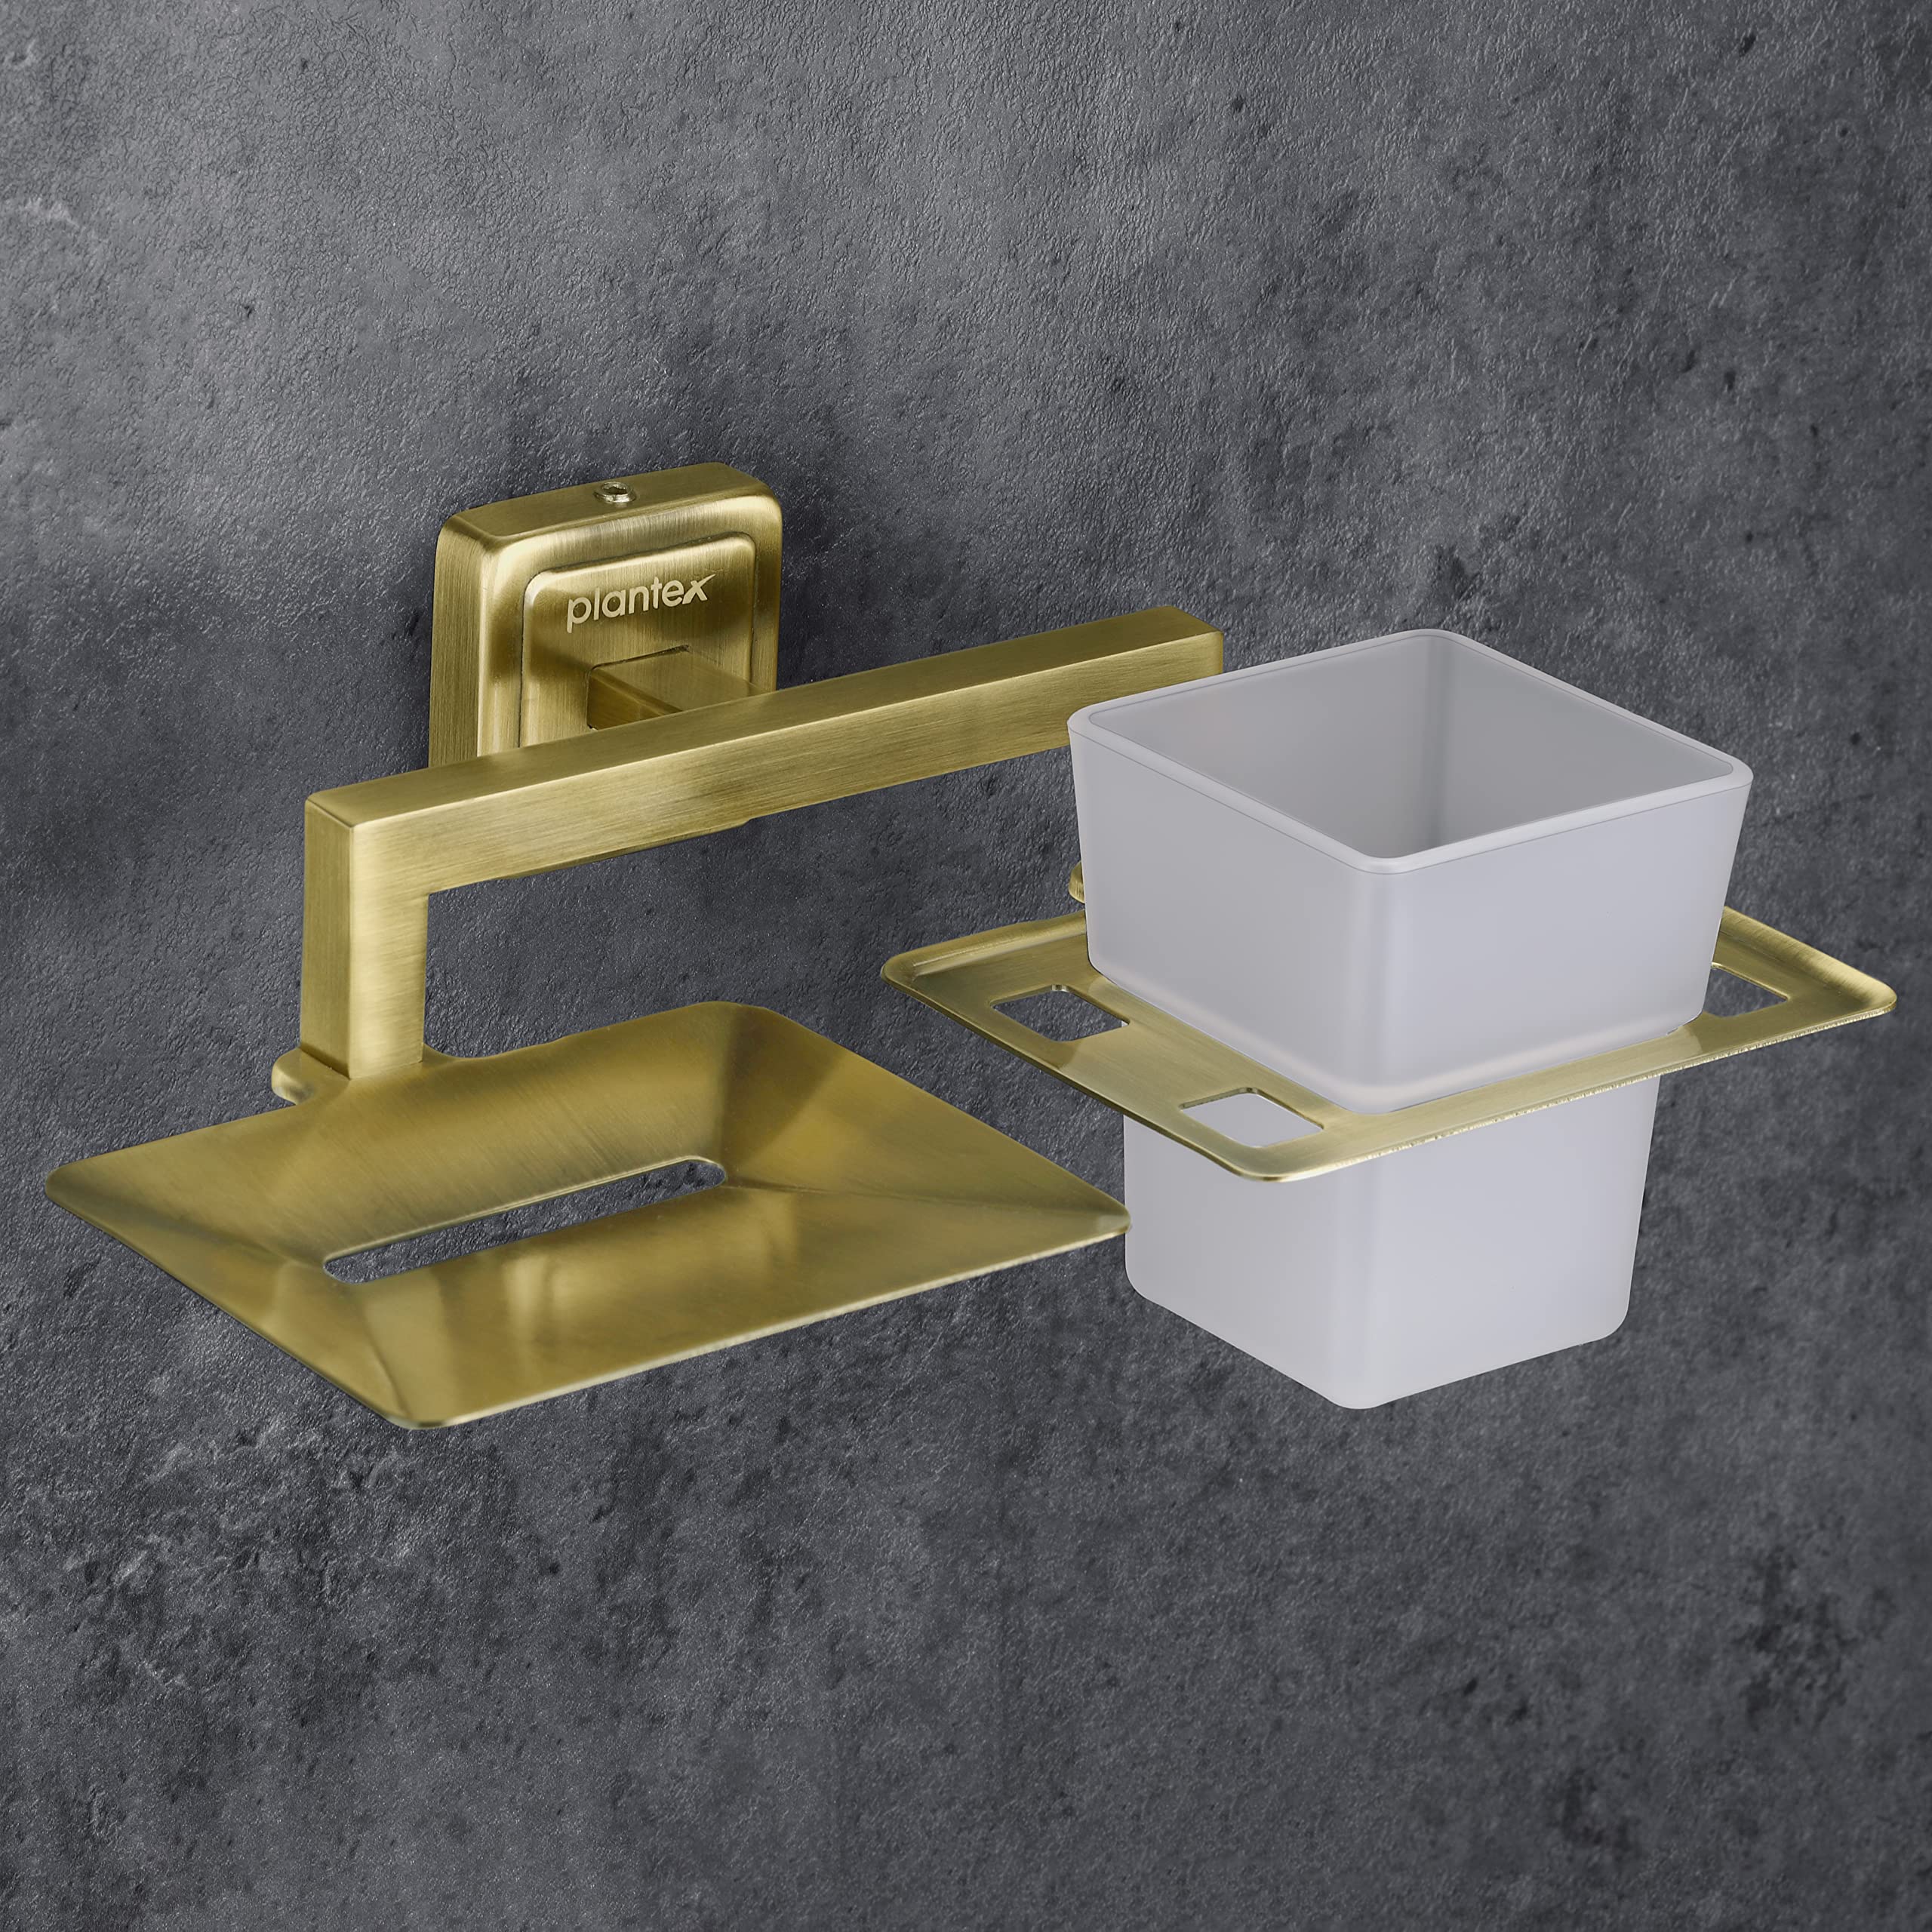 Plantex Deccan Antique Soap and Brush Holder Stand for Bathroom and Wash Basin (304 Stainless Steel)